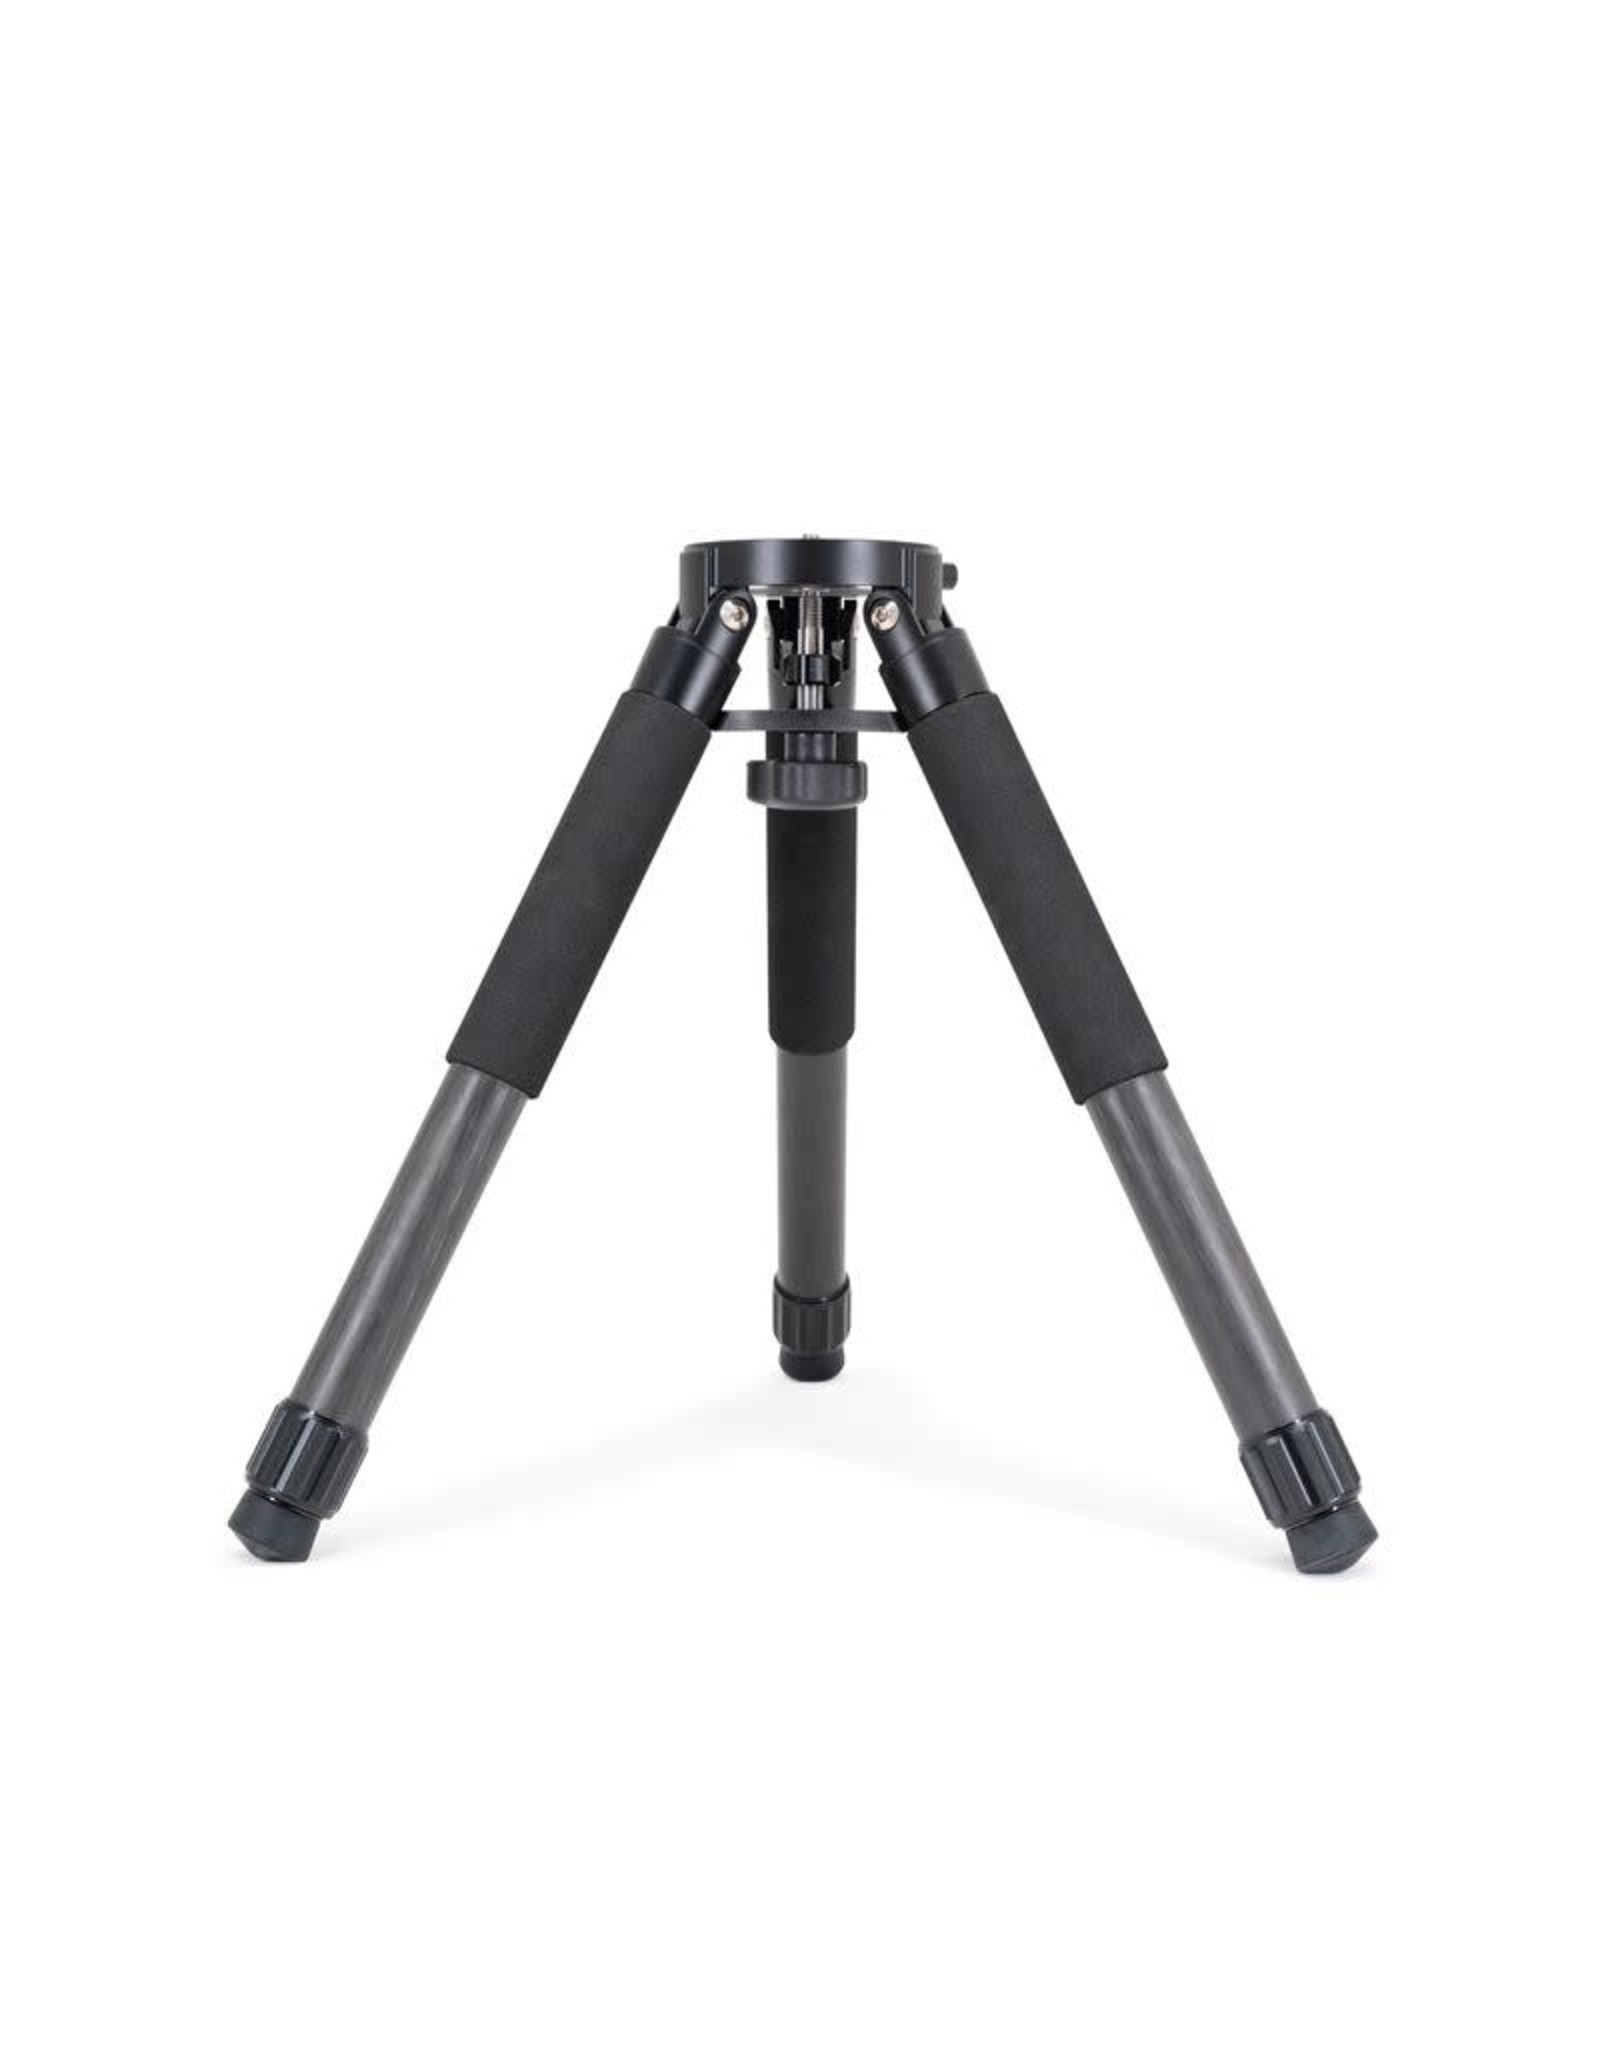 Is a Telescope Tripod the Same as for a Camera?